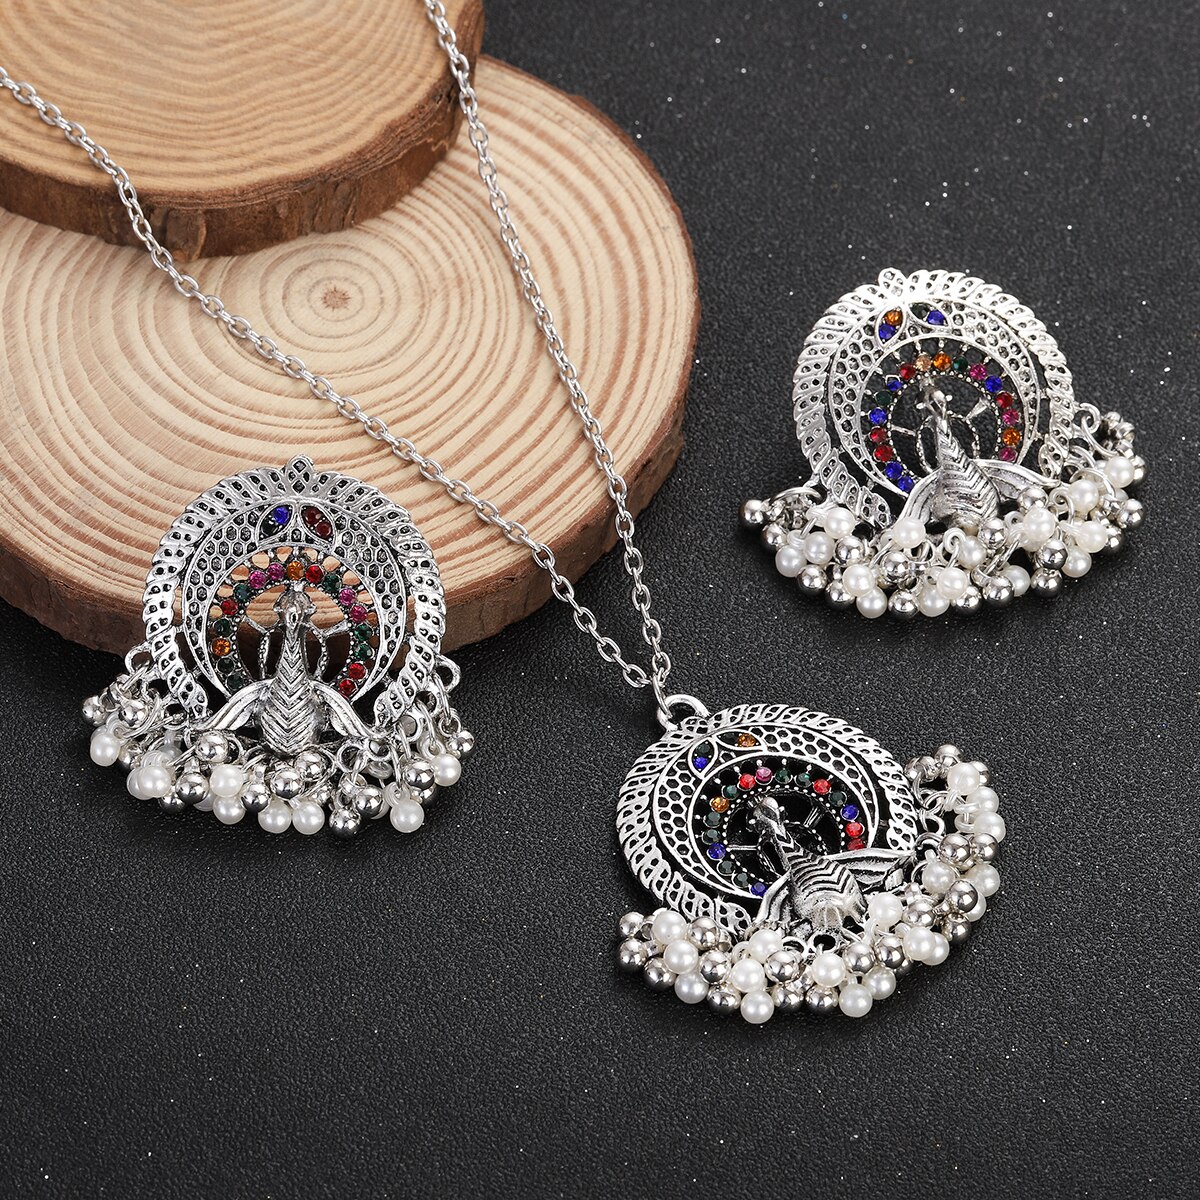 Vintage-Silver-Color-Jewelry-Sets-for-Women-Accessories-Ethnic-Geometric-Peacock-Crystal-Pendant-Nec-1005004941302824-9